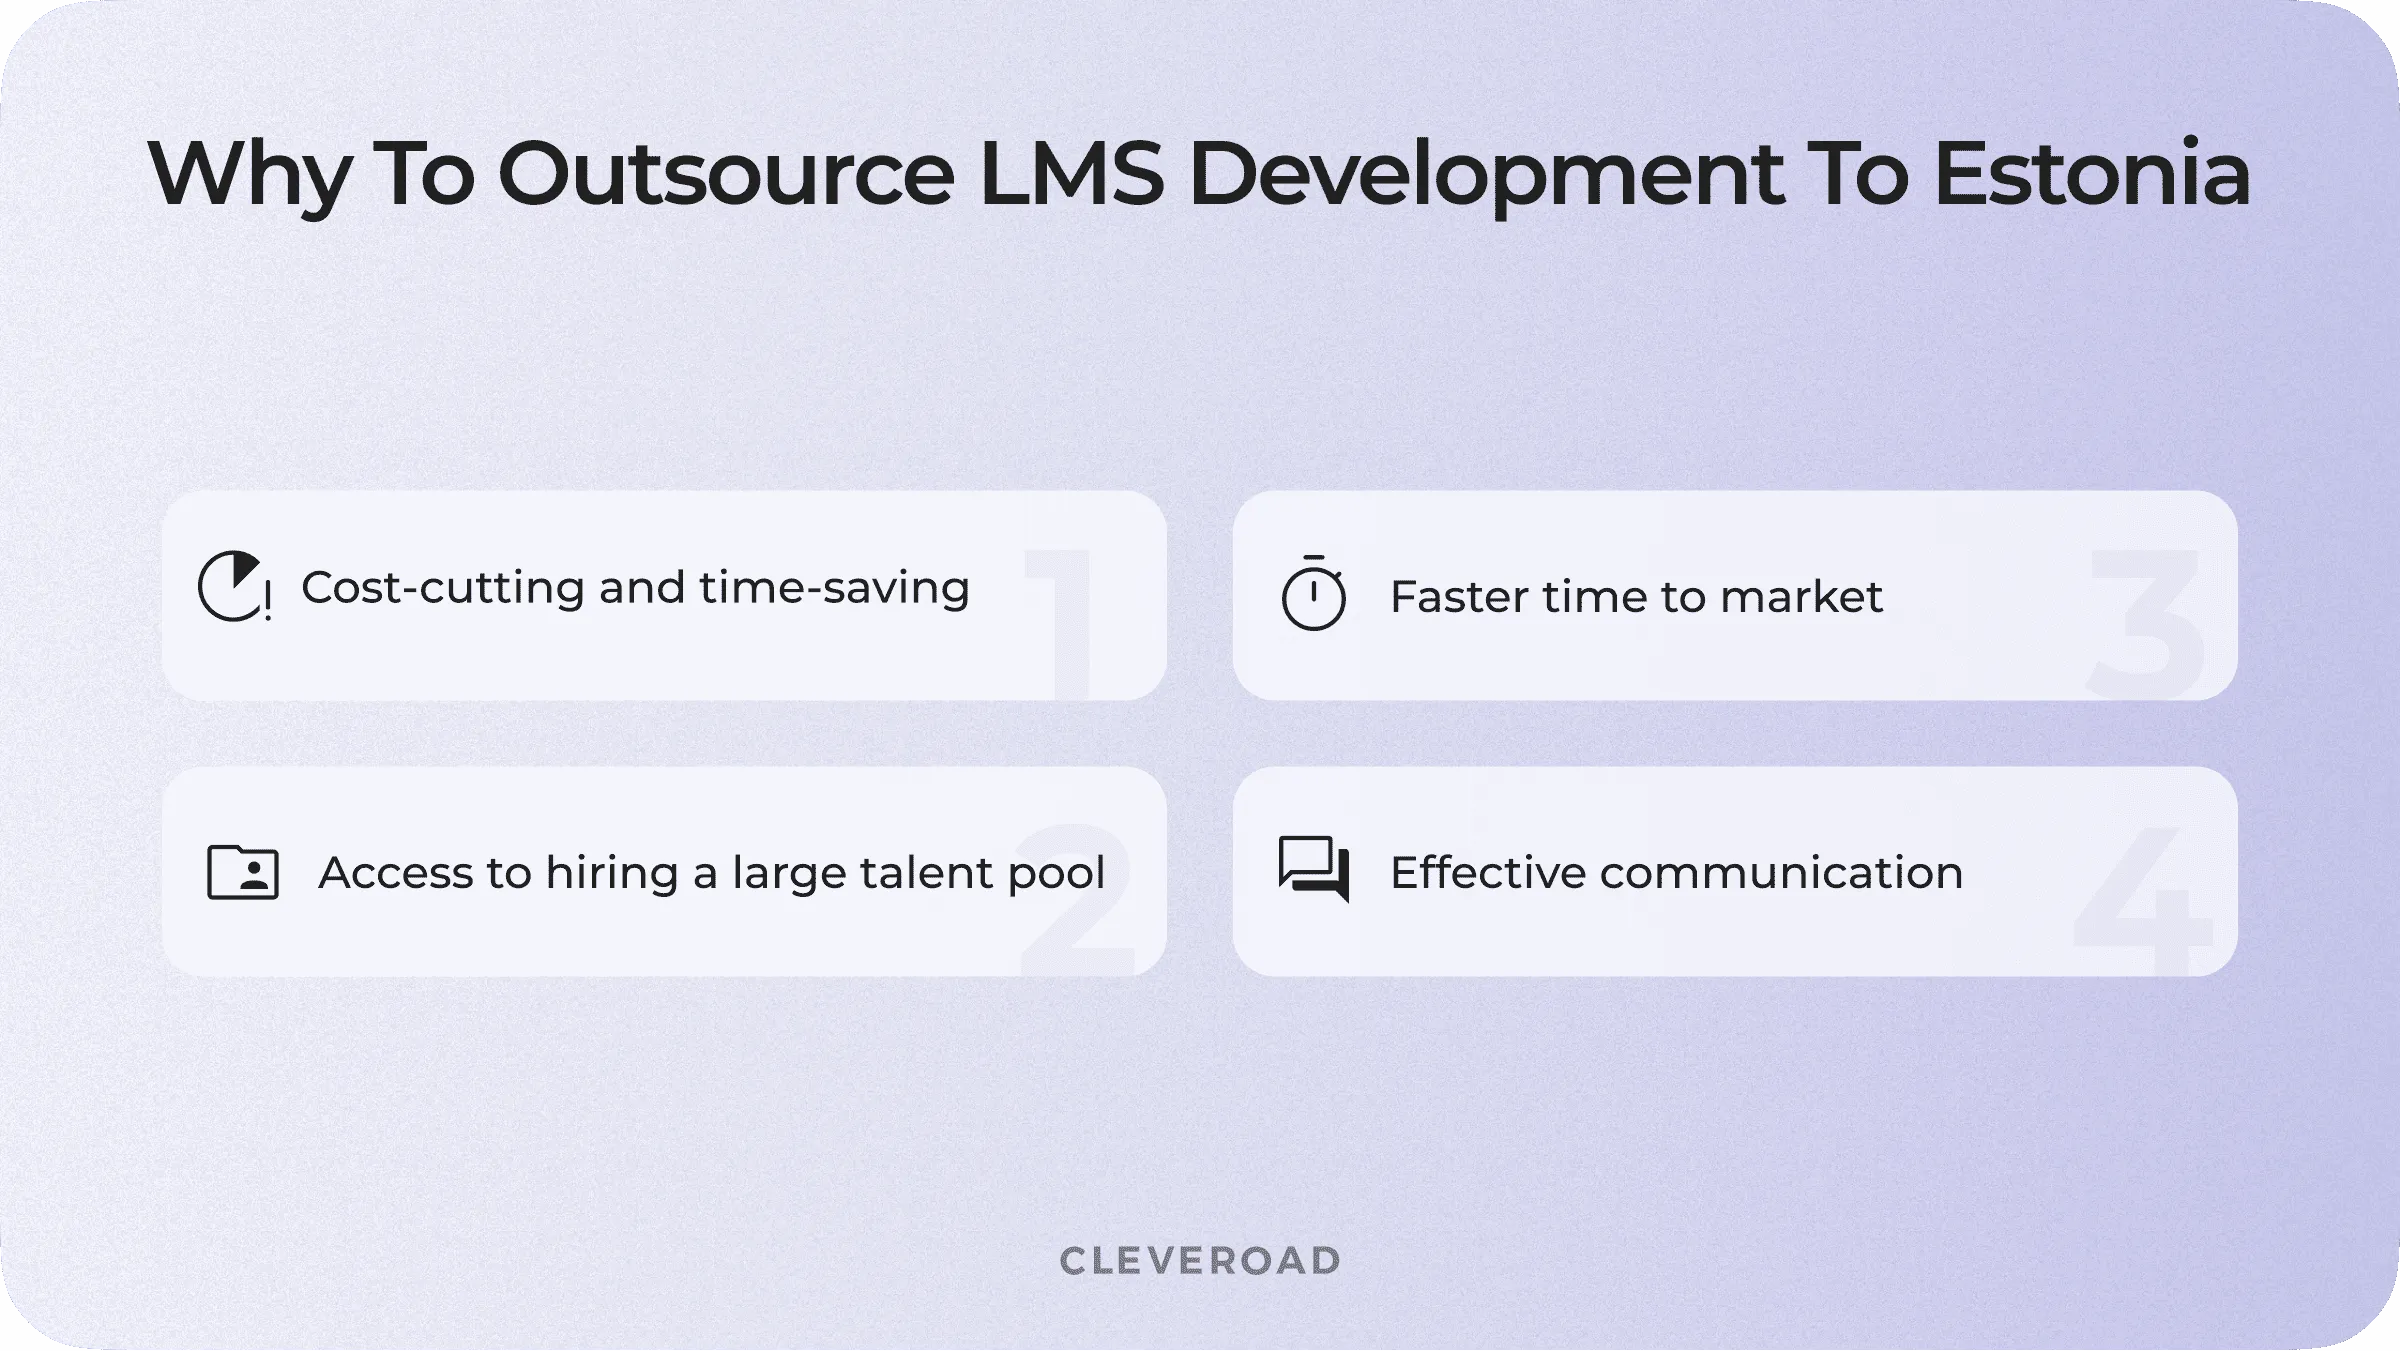 Top reasons to outsource software development